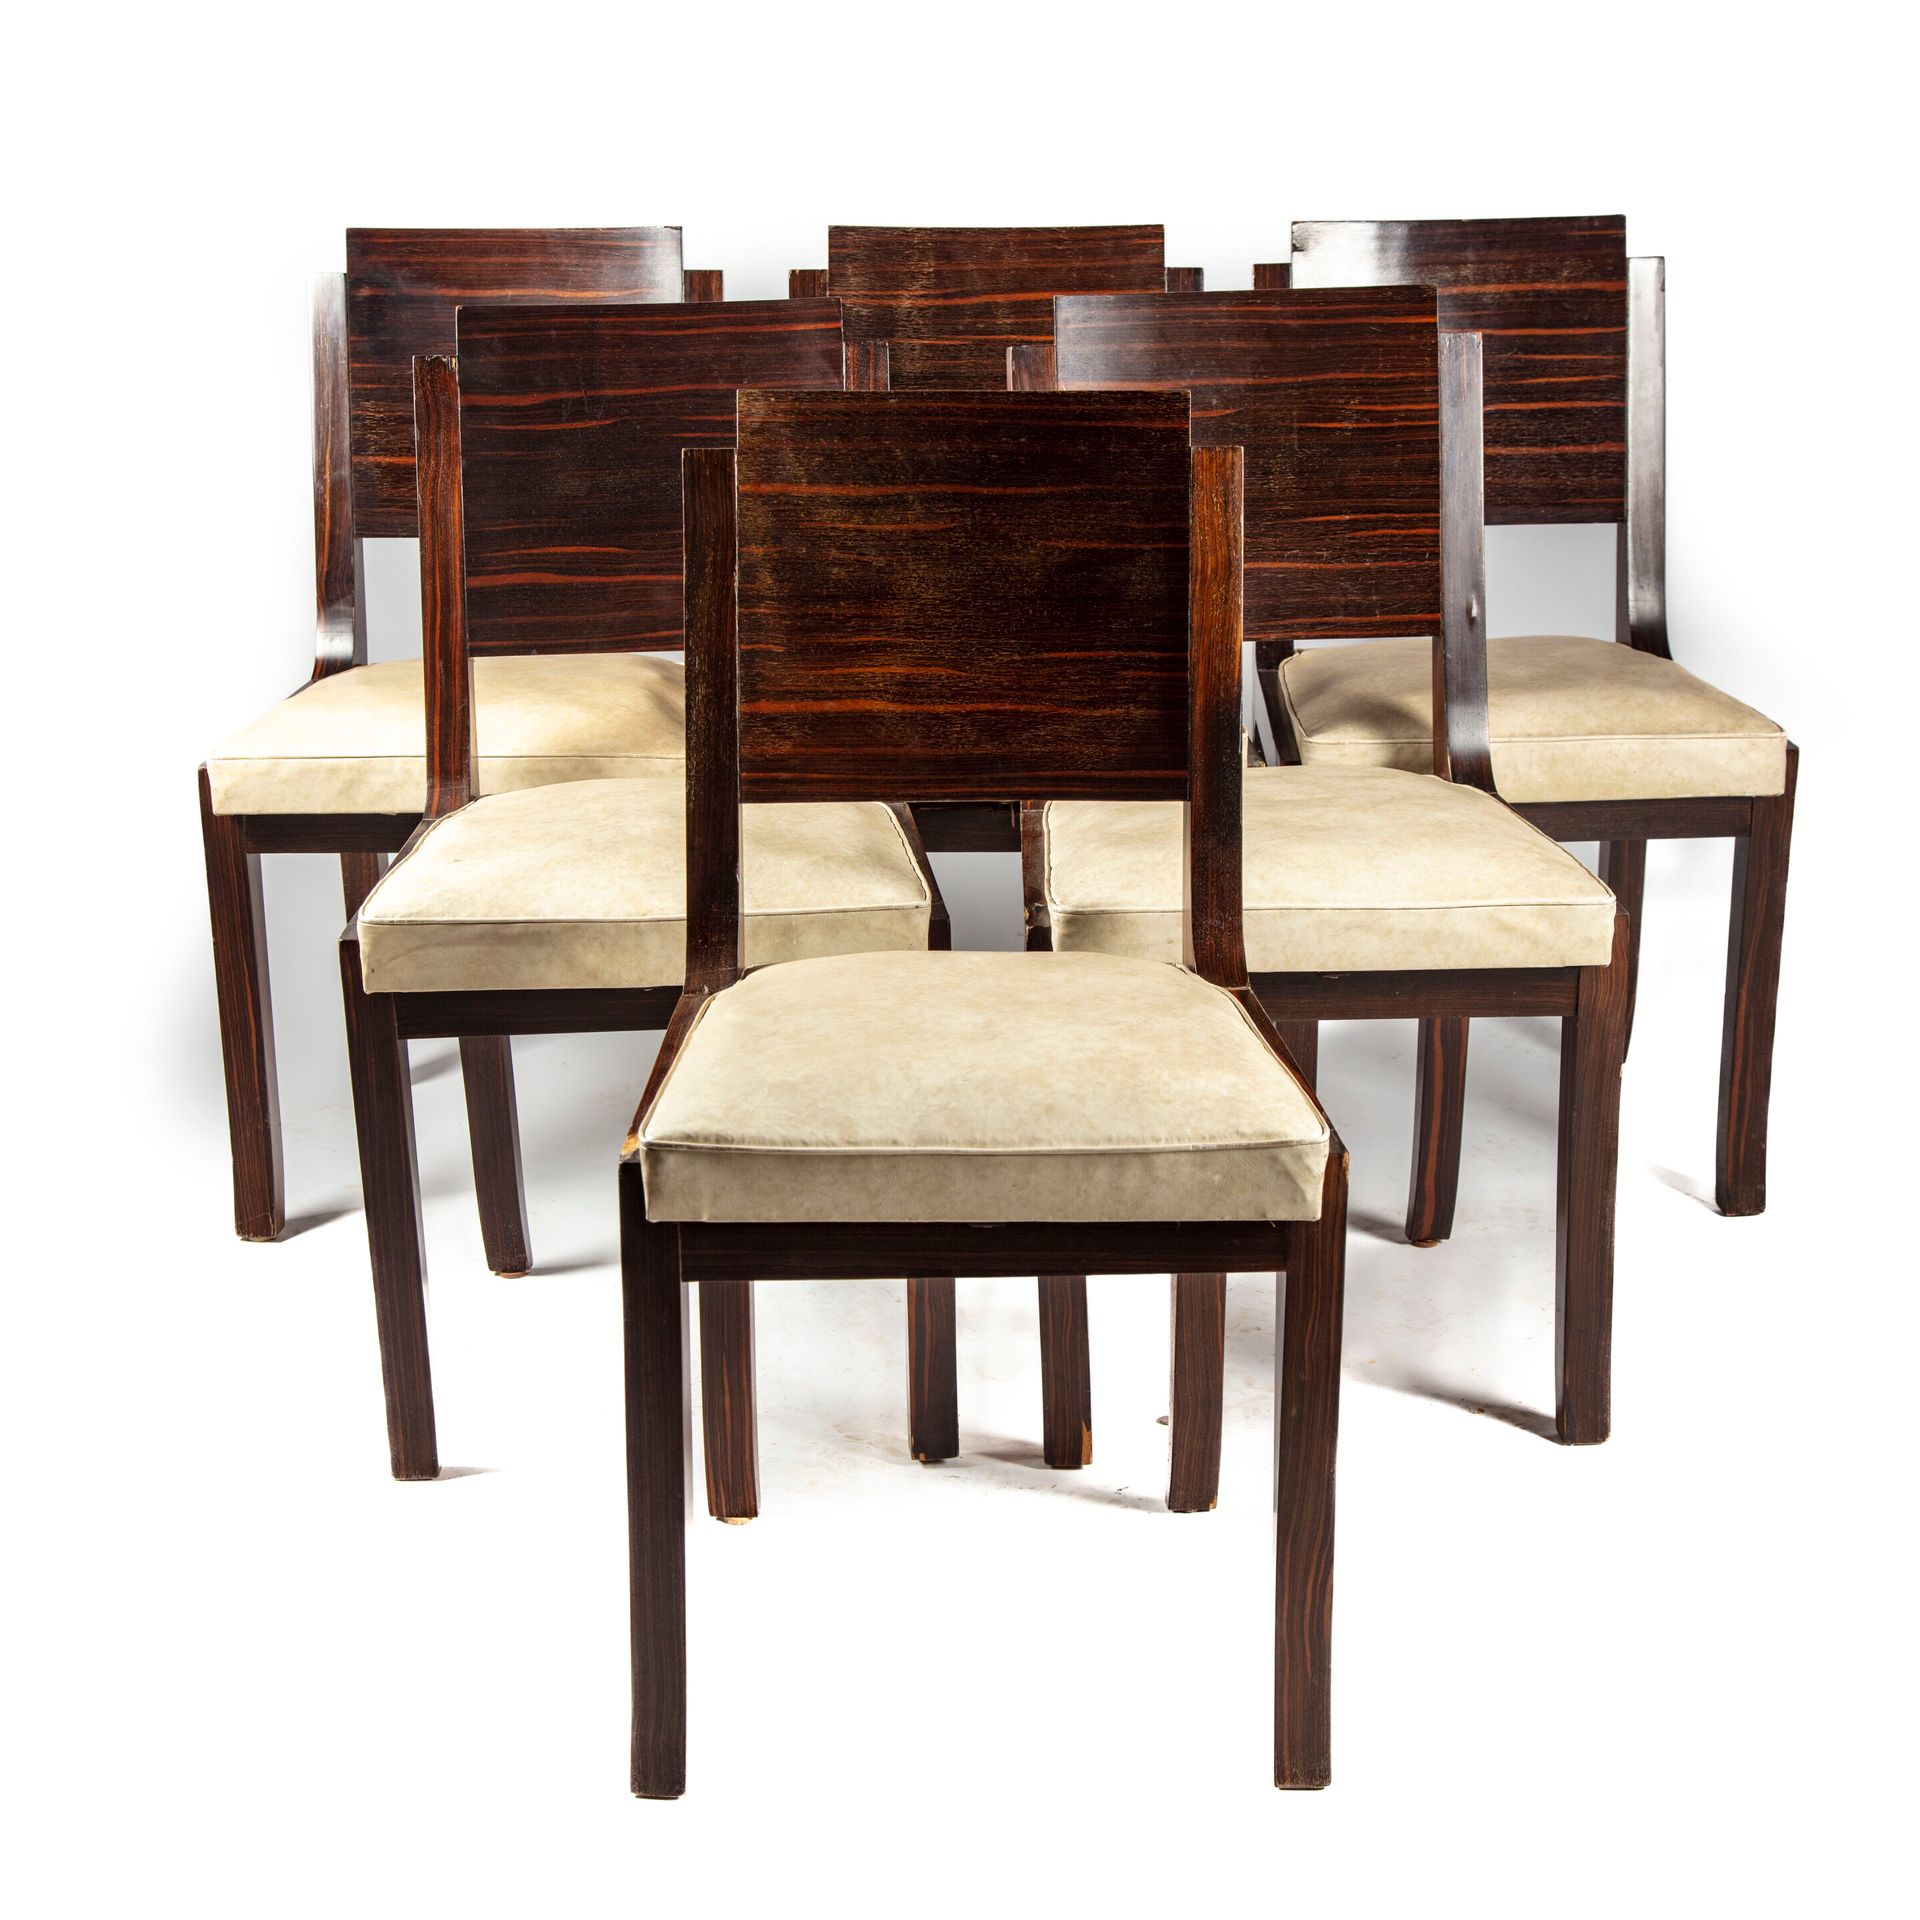 Null Suite of six chairs with rosewood veneer, banded backs, sheath legs. 
Art d&hellip;